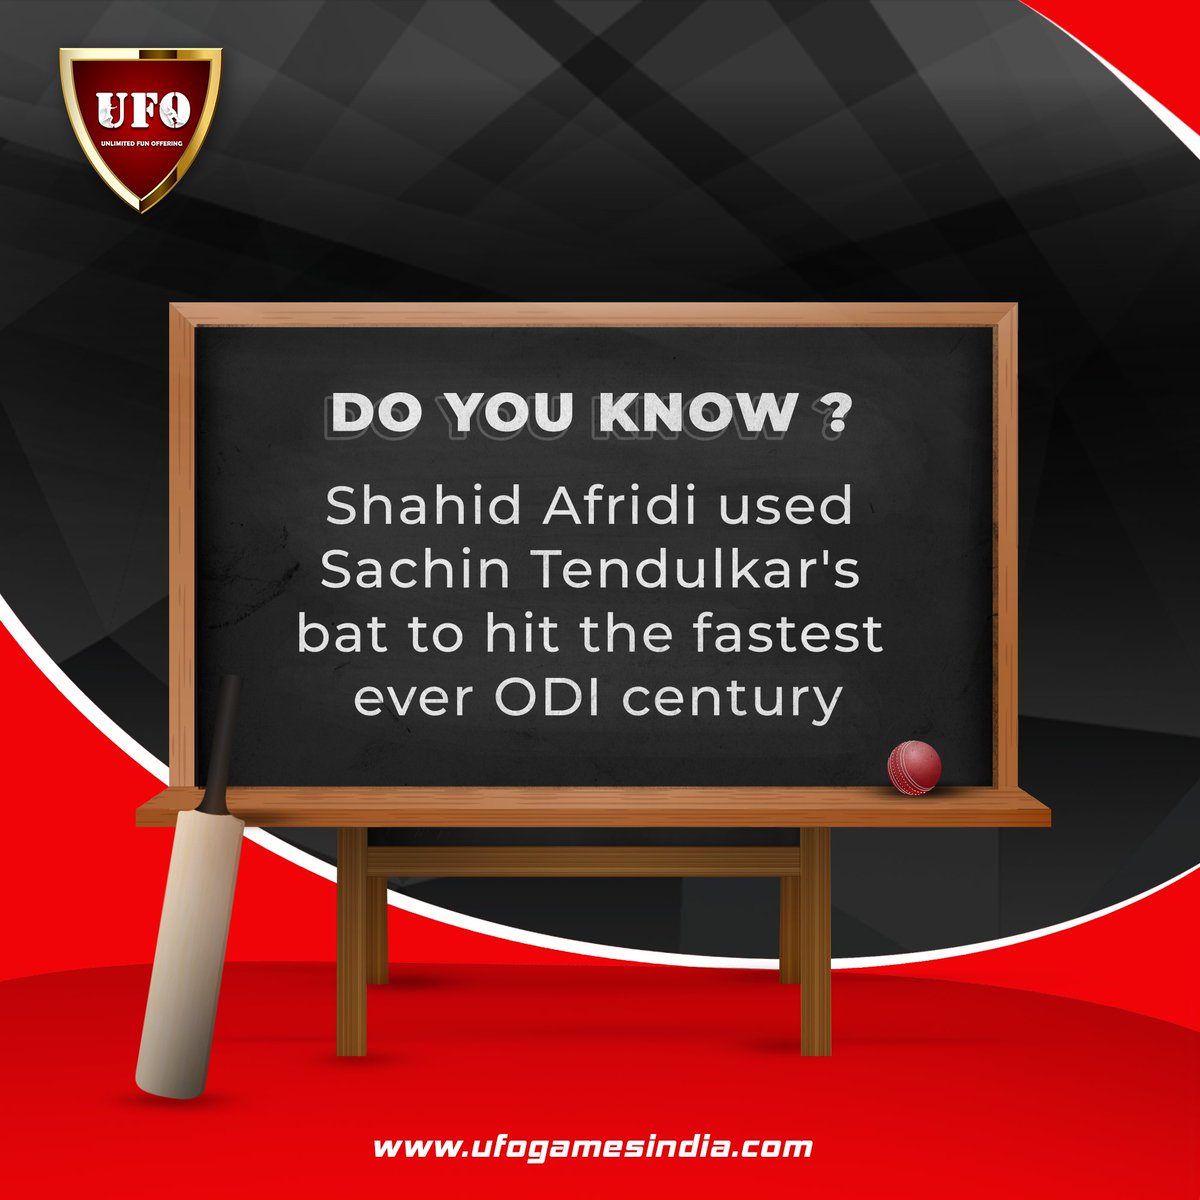 He scored a 37-ball century against Sri Lanka in 1996 and held the record for the fastest ODI century over 17 years.

#UFOGames #UnlimitedFunOffering #Cricket 
#cricketlovers 
#cricketer  
#cricketfacts 
#cricketmerijaan  
#cricketfacts
#CricketTwitter